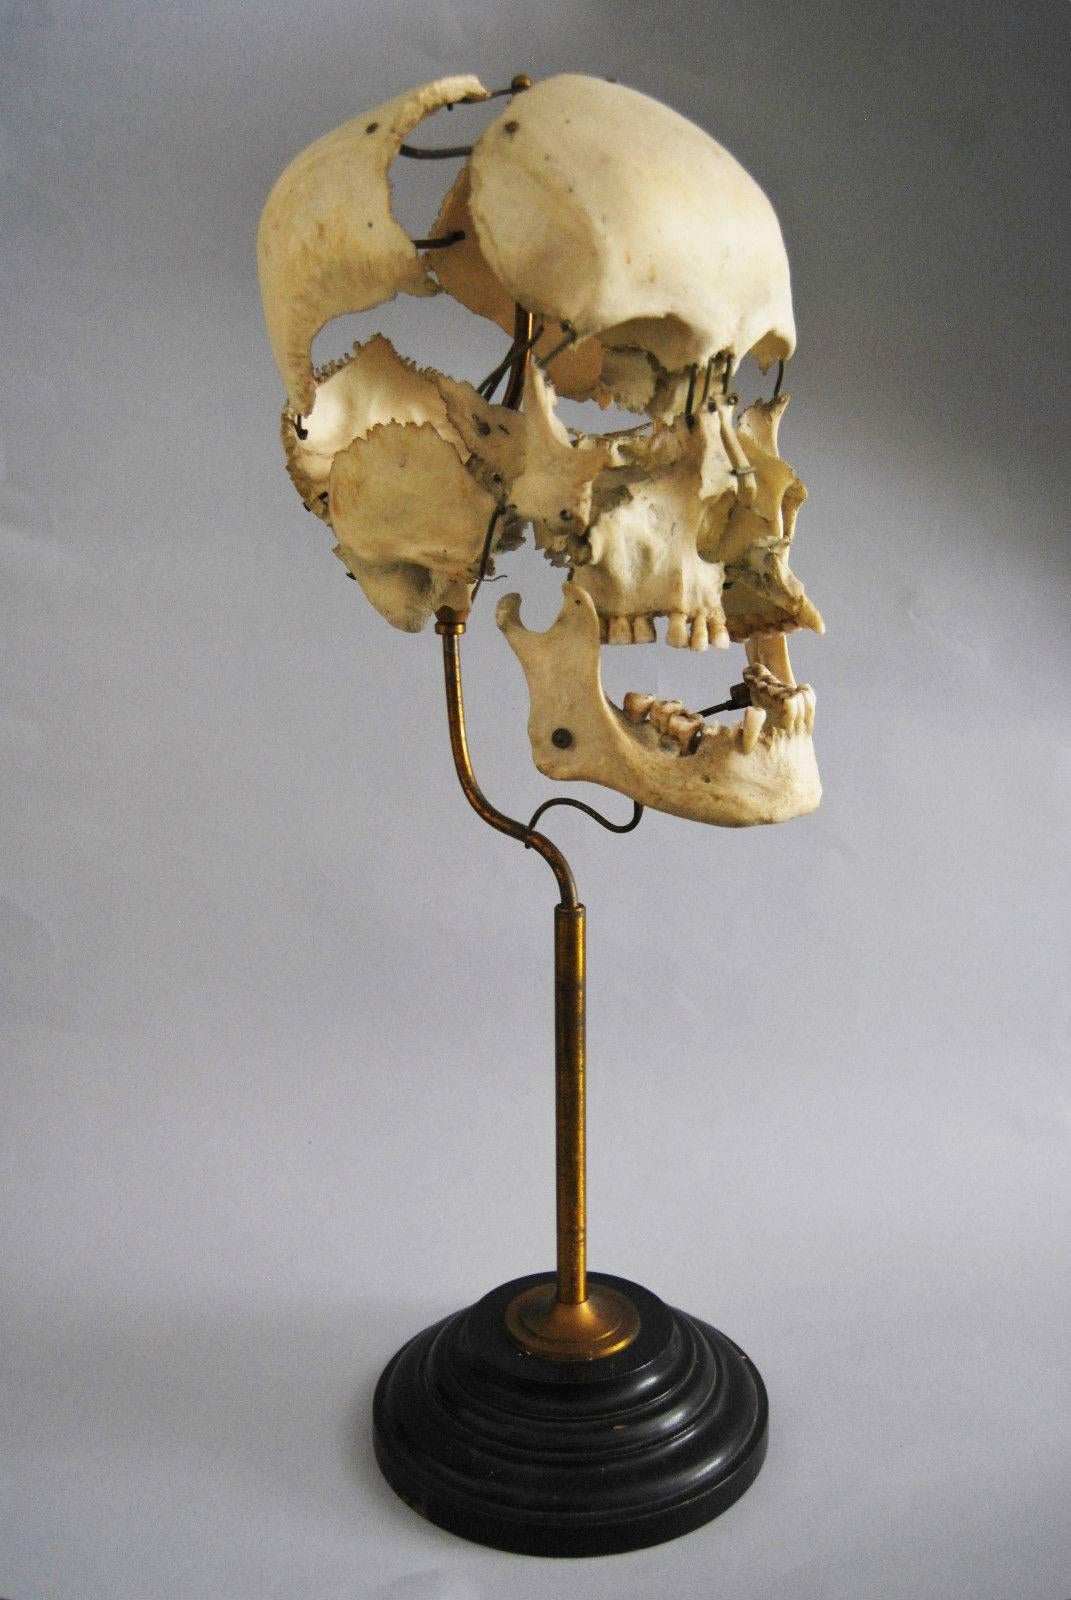 A Beauchene Skull, also known as an exploded skull, is a disarticulated human skull that has been painstakingly reassembled on a stand with jointed, movable supports that allows for the moving and studying of the skull as a whole or each piece